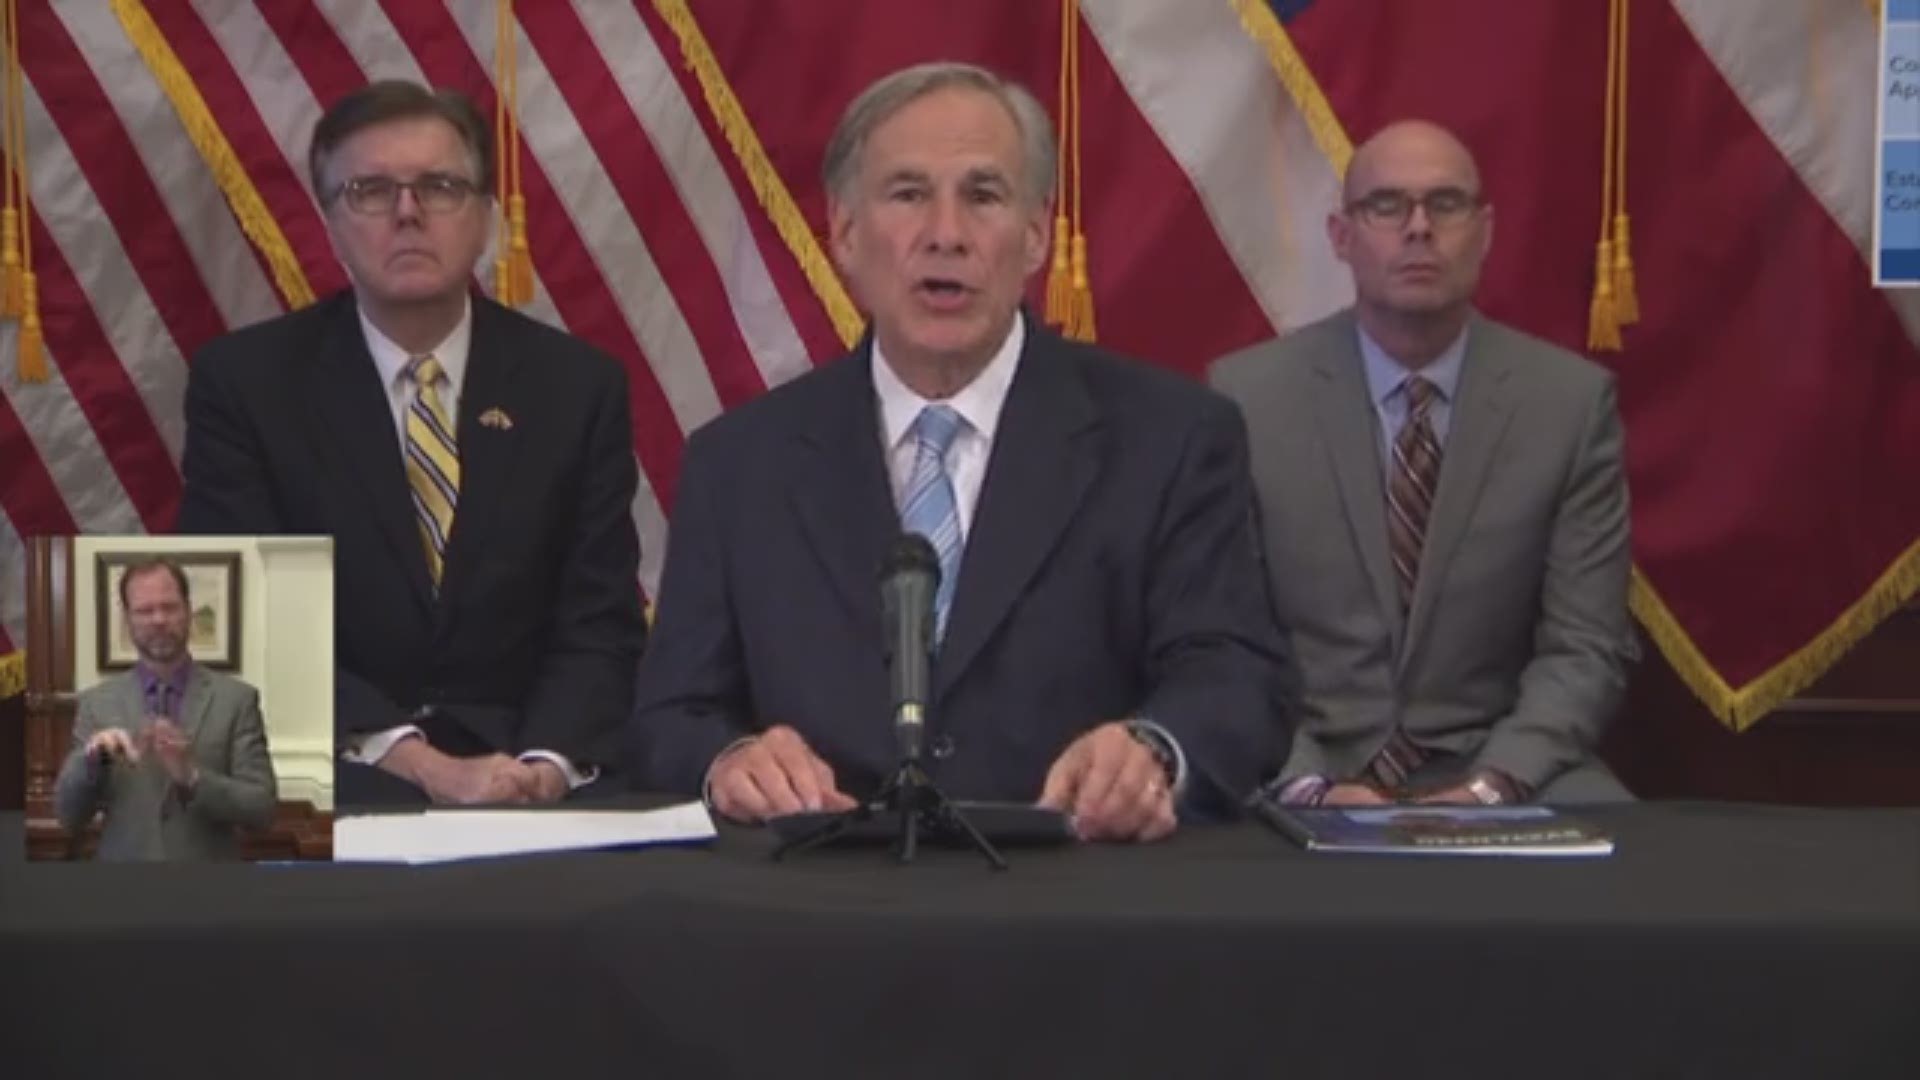 Retail stores, restaurants, theaters and malls can reopen Friday with a limited occupancy, Gov. Greg Abbott said Monday afternoon.